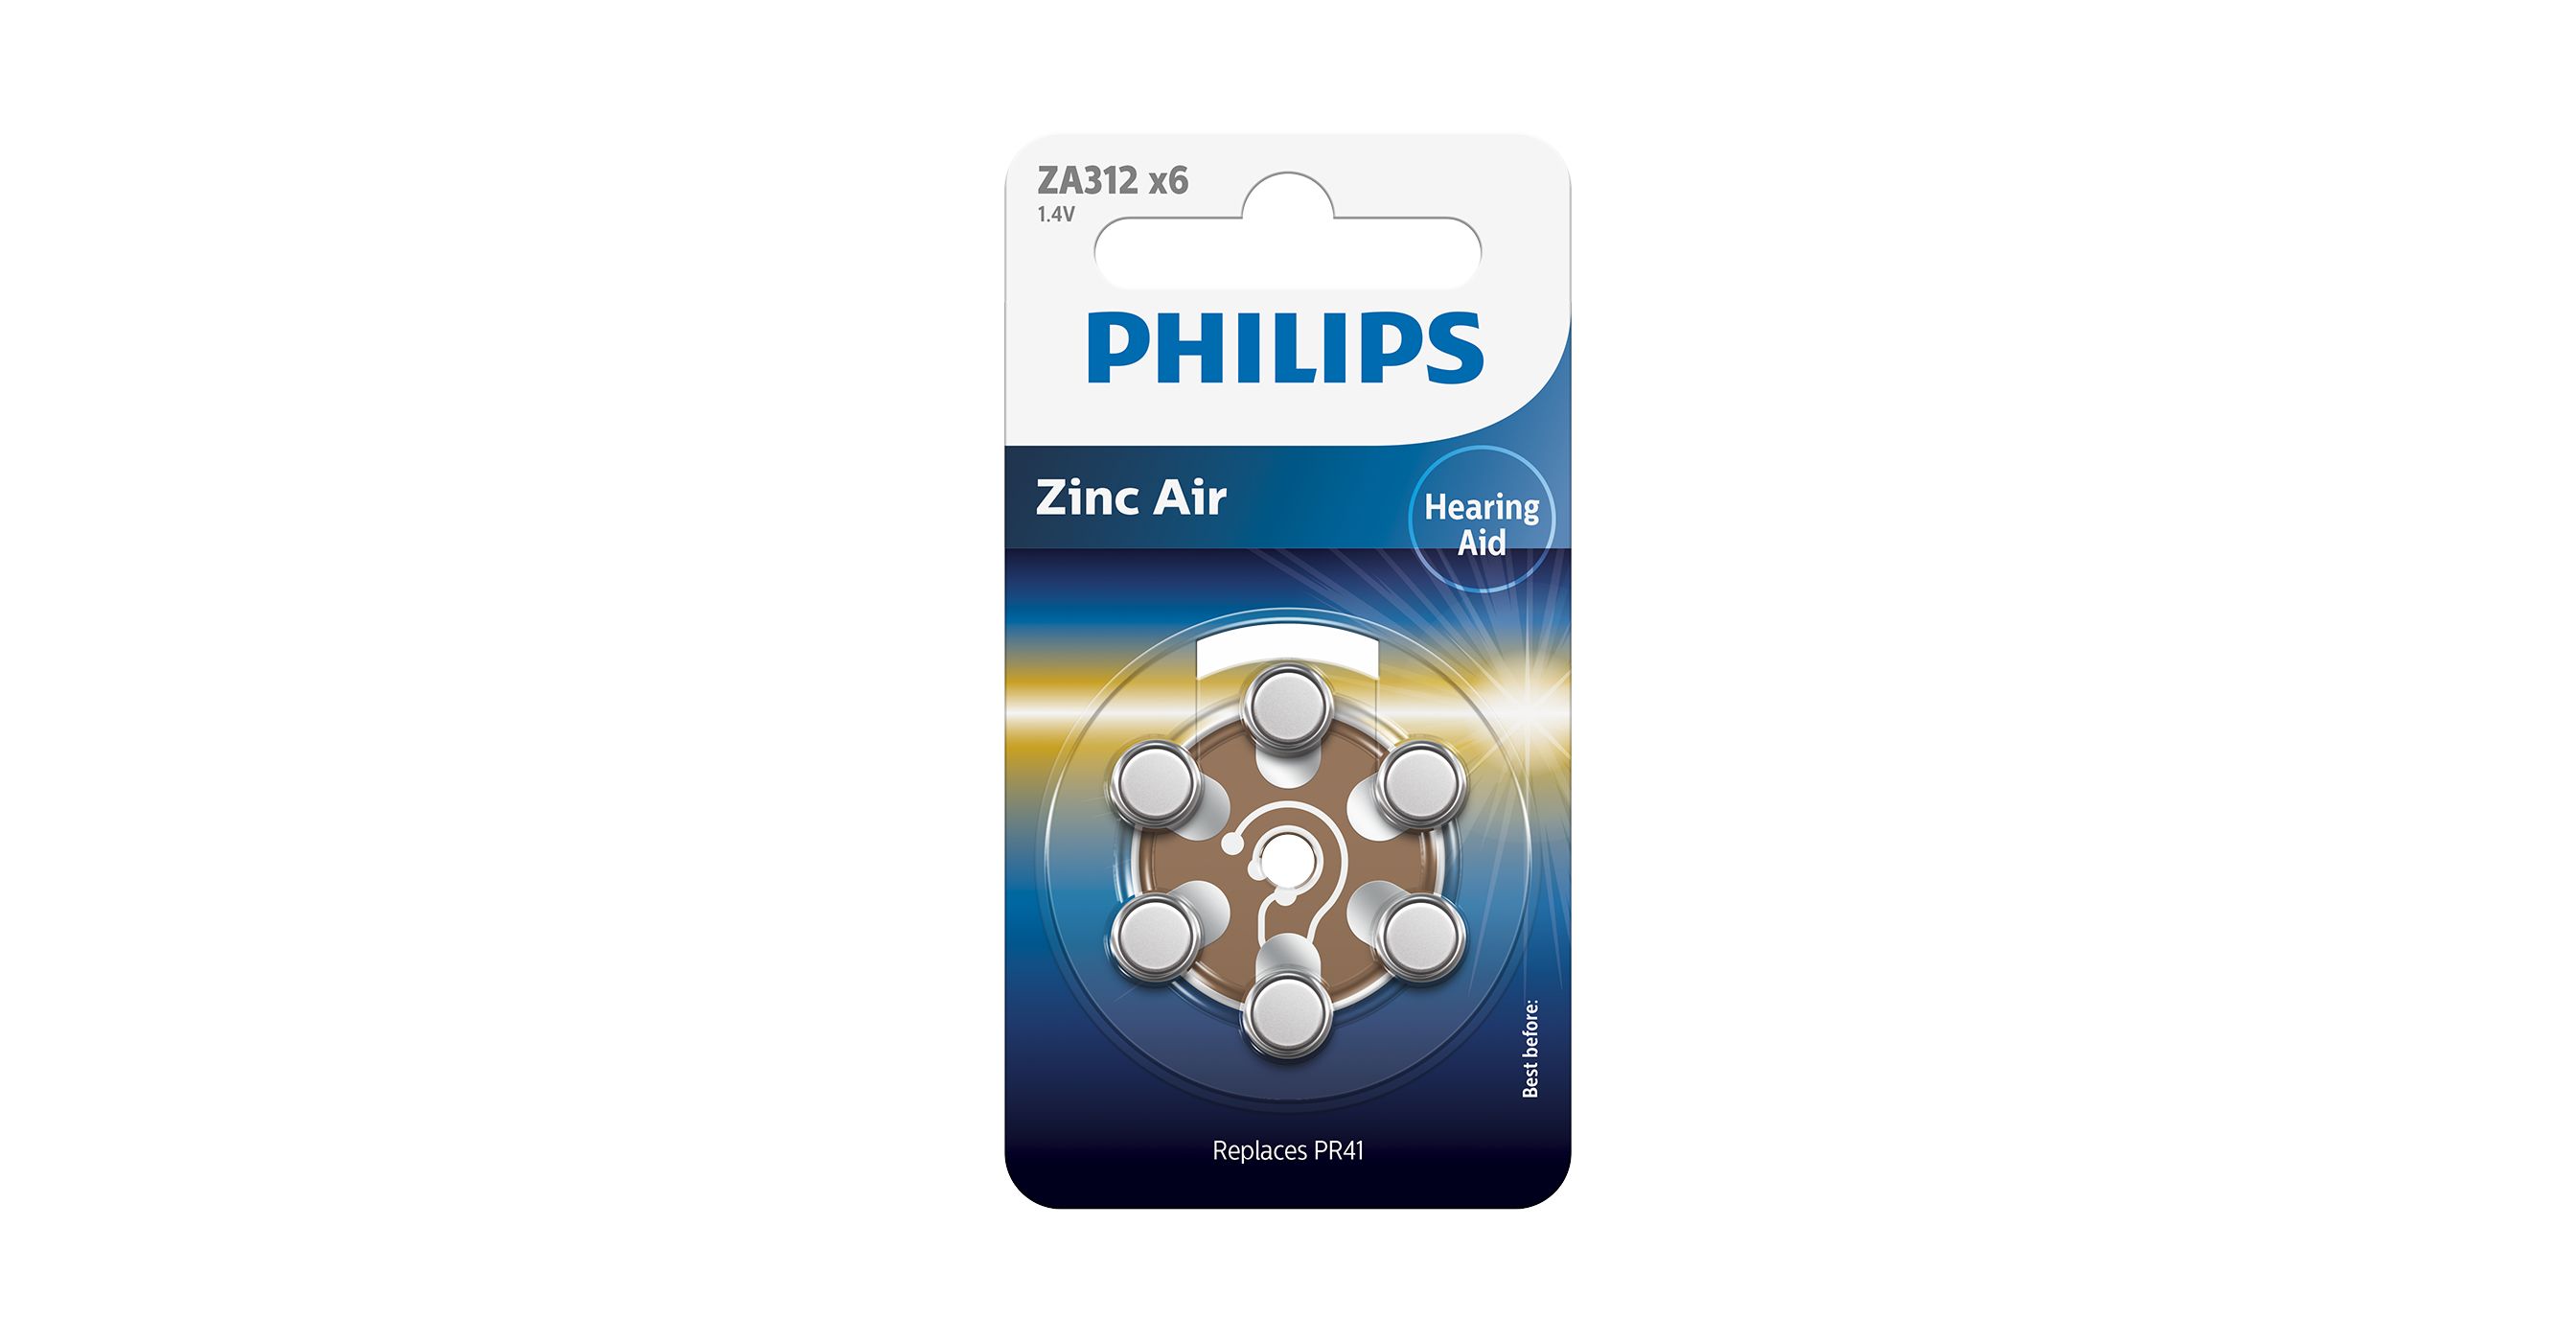 http://images.philips.com/is/image/PhilipsConsumer/ZA312B6A_10-PID-global-001?wid=2688&hei=1400&fit=constrain&$jpgsmall$